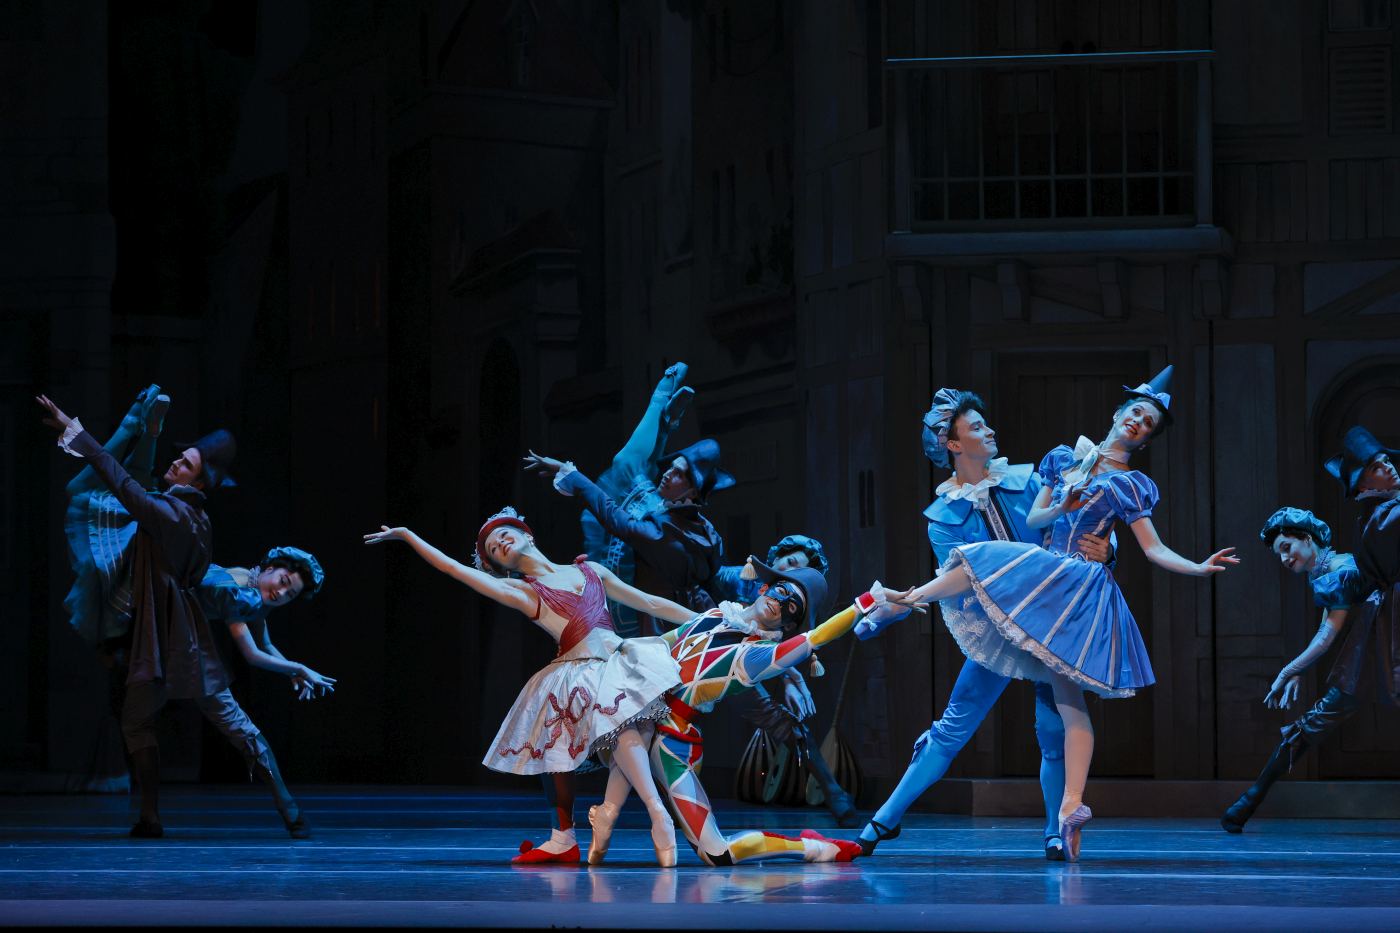 10. B.Bemet (Columbine), B.Chynoweth (Harlequin), J.Madden (Pierrette’s Partner), S.Spencer (Pierrette), and ensemble, “Harlequinade” by M.Petipa, additional choreography by A.Ratmansky; The Australian Ballet 2022 © J.Busby